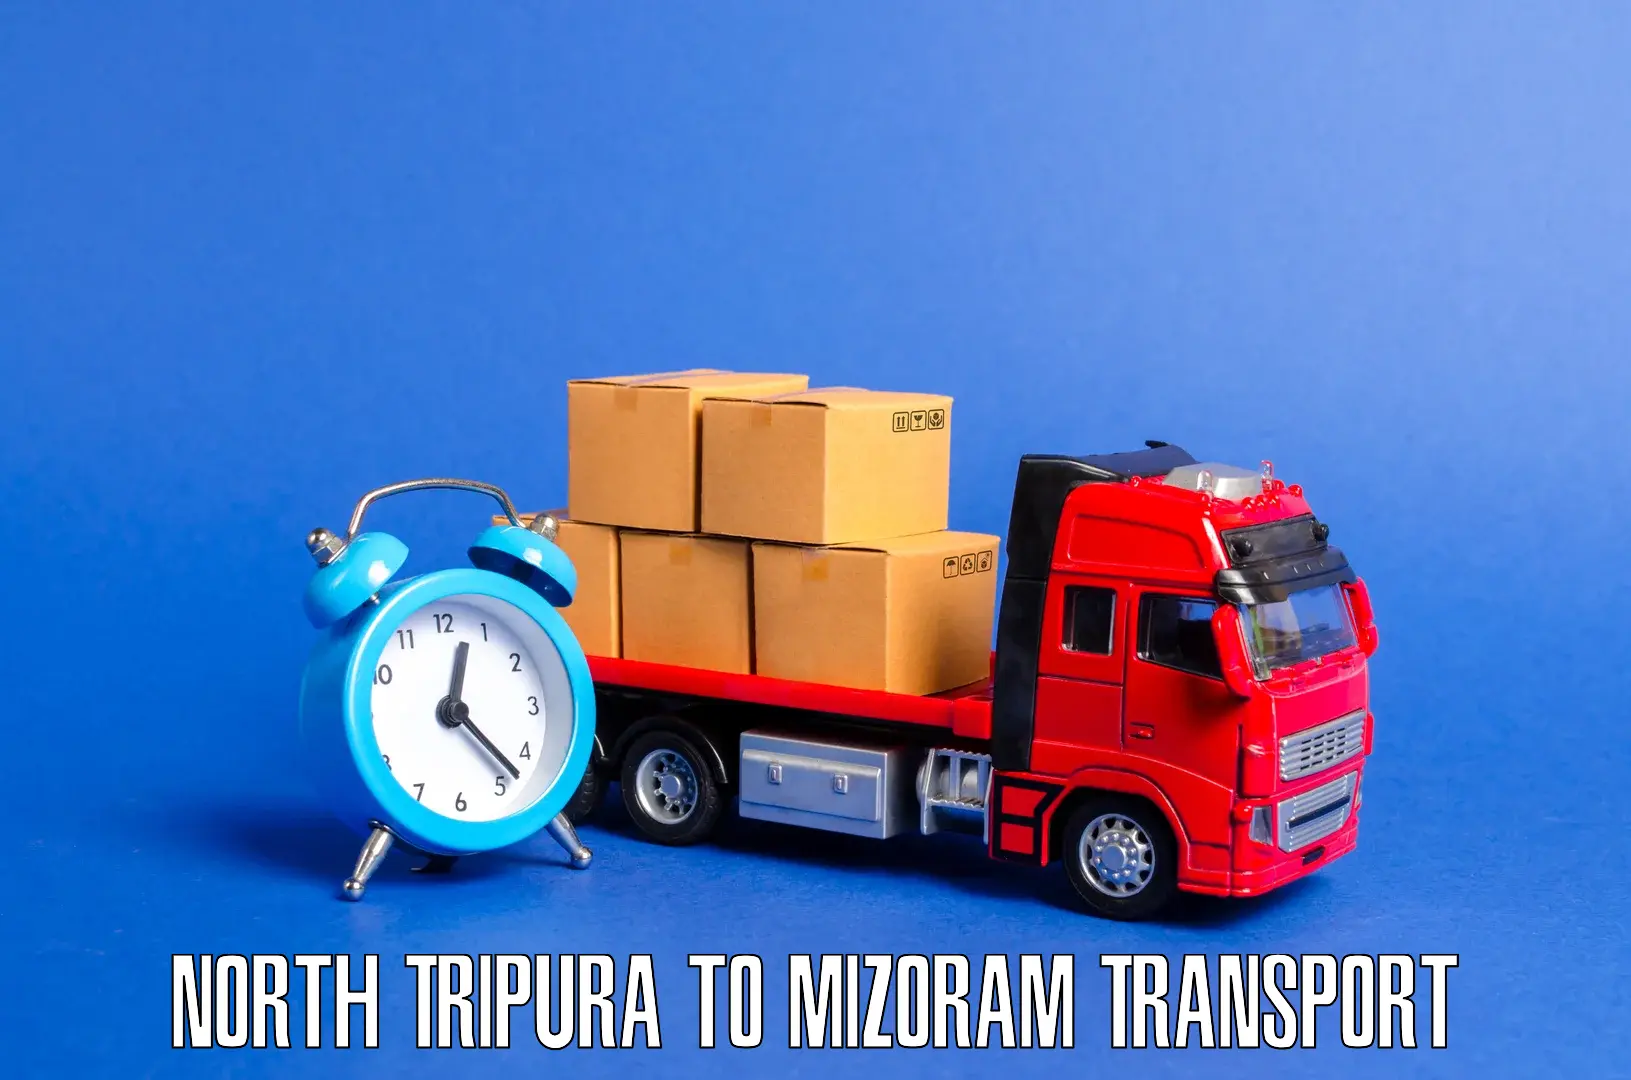 Air freight transport services North Tripura to Aizawl